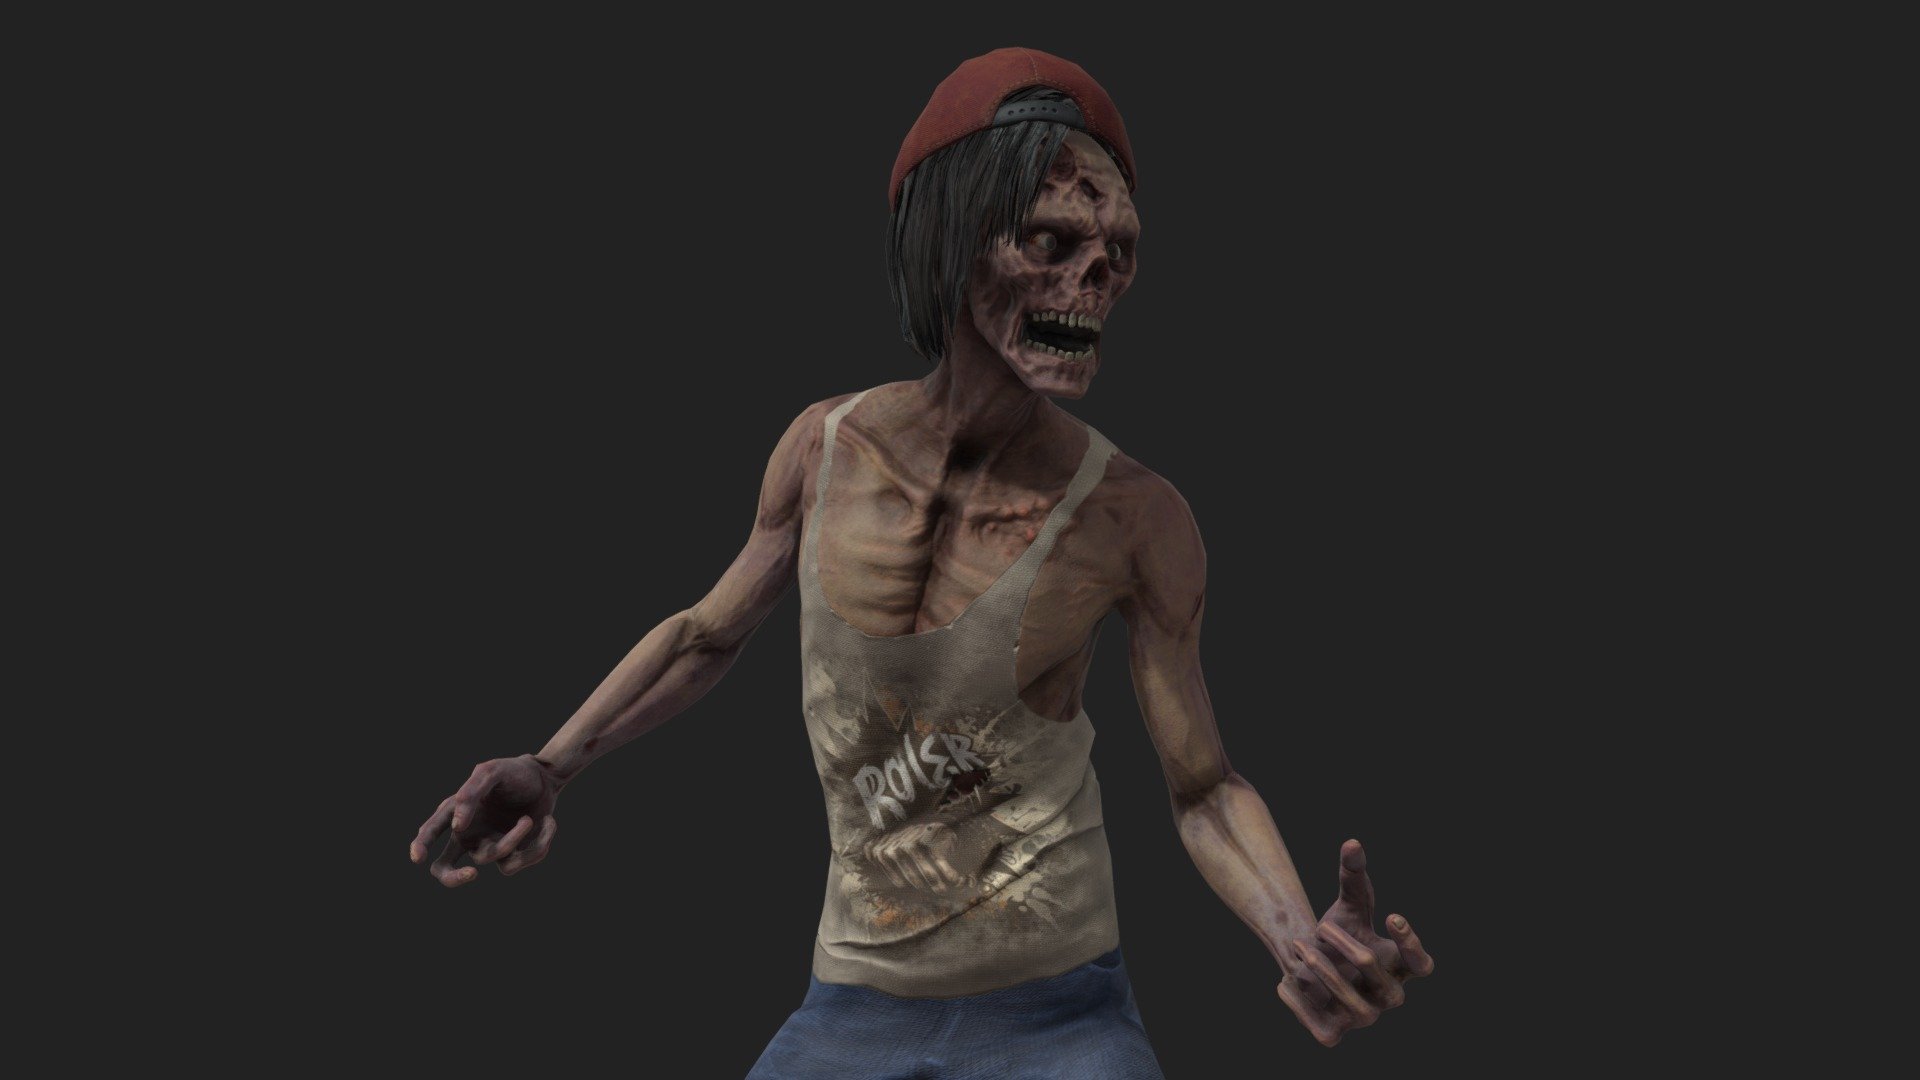 Features:
Video preview UE4
Included in additional file:
Maya file, Fbx rigged low-poly on epic skeleton, 3 sets of textures, Unreal Engine project 4.26 as in video preview, Unity project in 2021.3.15f1

Rigged: Yes
Rigged to Epic skeleton: Yes
If rigged to the Epic skeleton, IK bones are included: Yes
Animated: demo only for Unreal engine
Number of Animations: 21
Animation types (Root Motion/In-place): 0/21
Number of characters: 1
Vertex counts of characters: 37078
Number of Materials and Material Instances: 4 Materials and 4 Material Instances 
Number of Textures: 10 and 12 in Unity
Texture Resolutions: 4096x4096
Important/Additional Notes: There are additional bones in the skeleton for jaw. It is possible to change the parameter of shade assets - Zombie teen - Buy Royalty Free 3D model by dogheart1 3d model